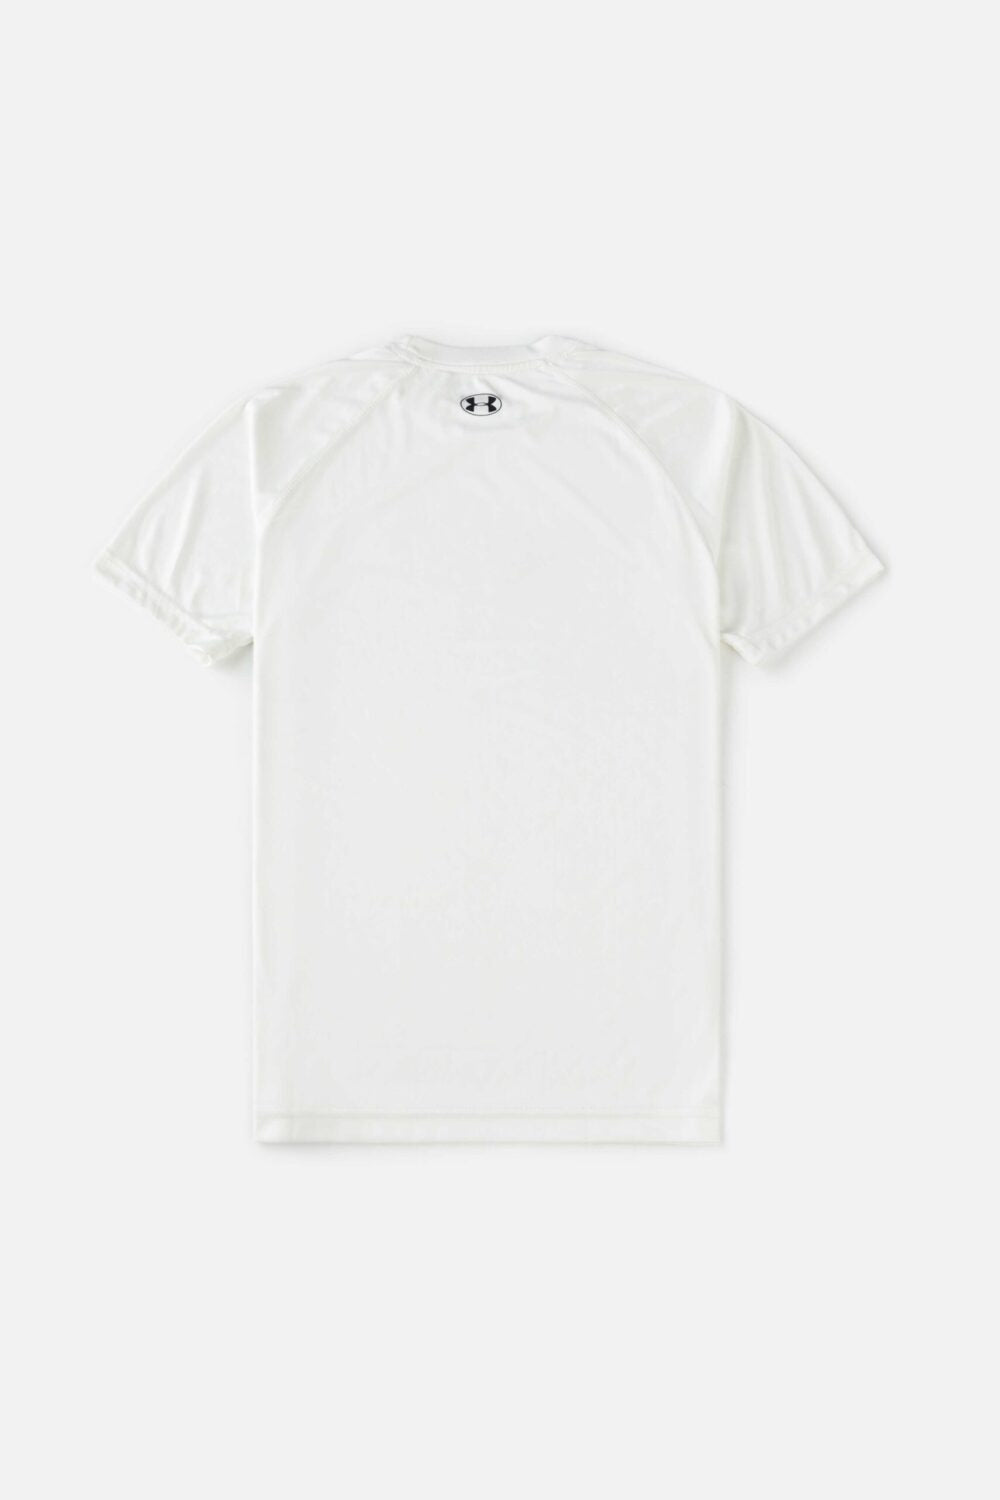 Under Armour Imported Dri-FIT T Shirt – White